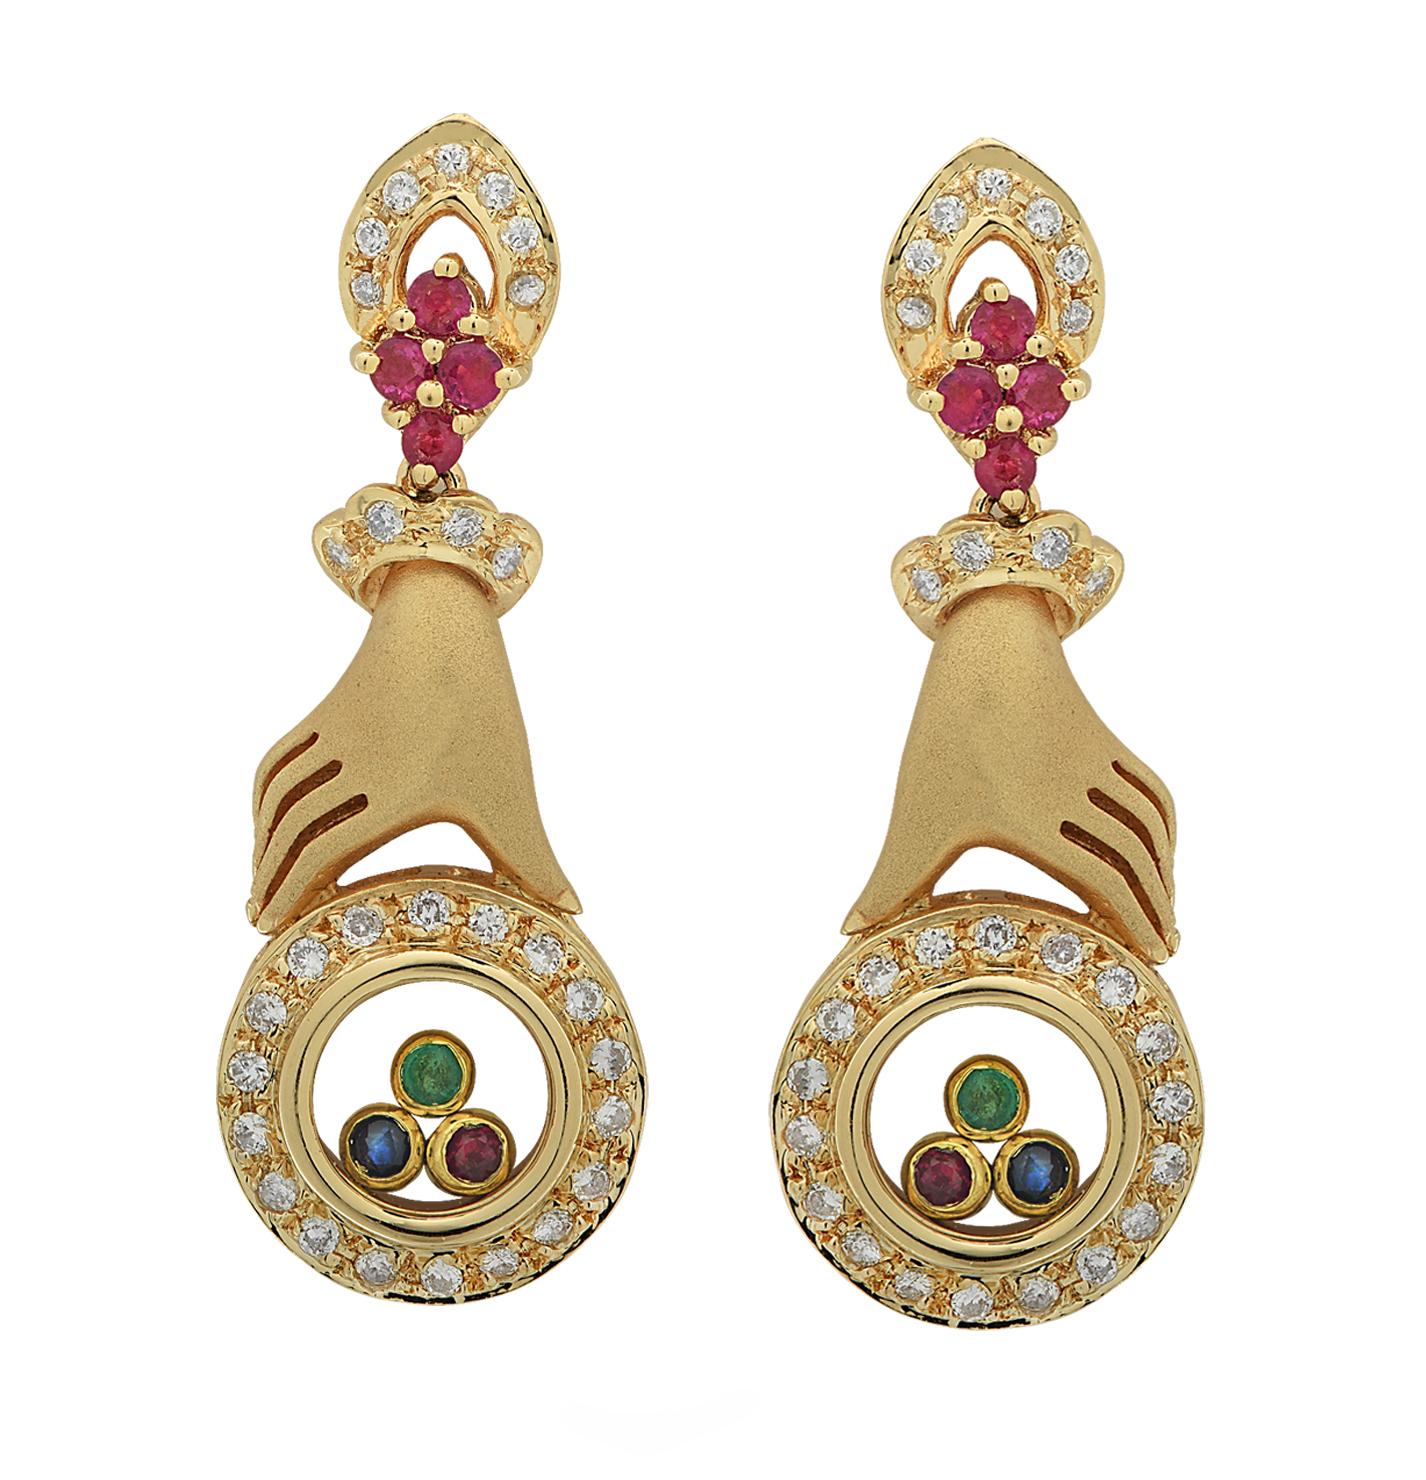 Gorgeous earrings crafted in 18 karat yellow gold, featuring 58 round brilliant cut diamonds weighing approximately .50 carats total, G color, VS-SI clarity and 14 mixed emerald, sapphires and rubies weighing approximately .30 carats total. These